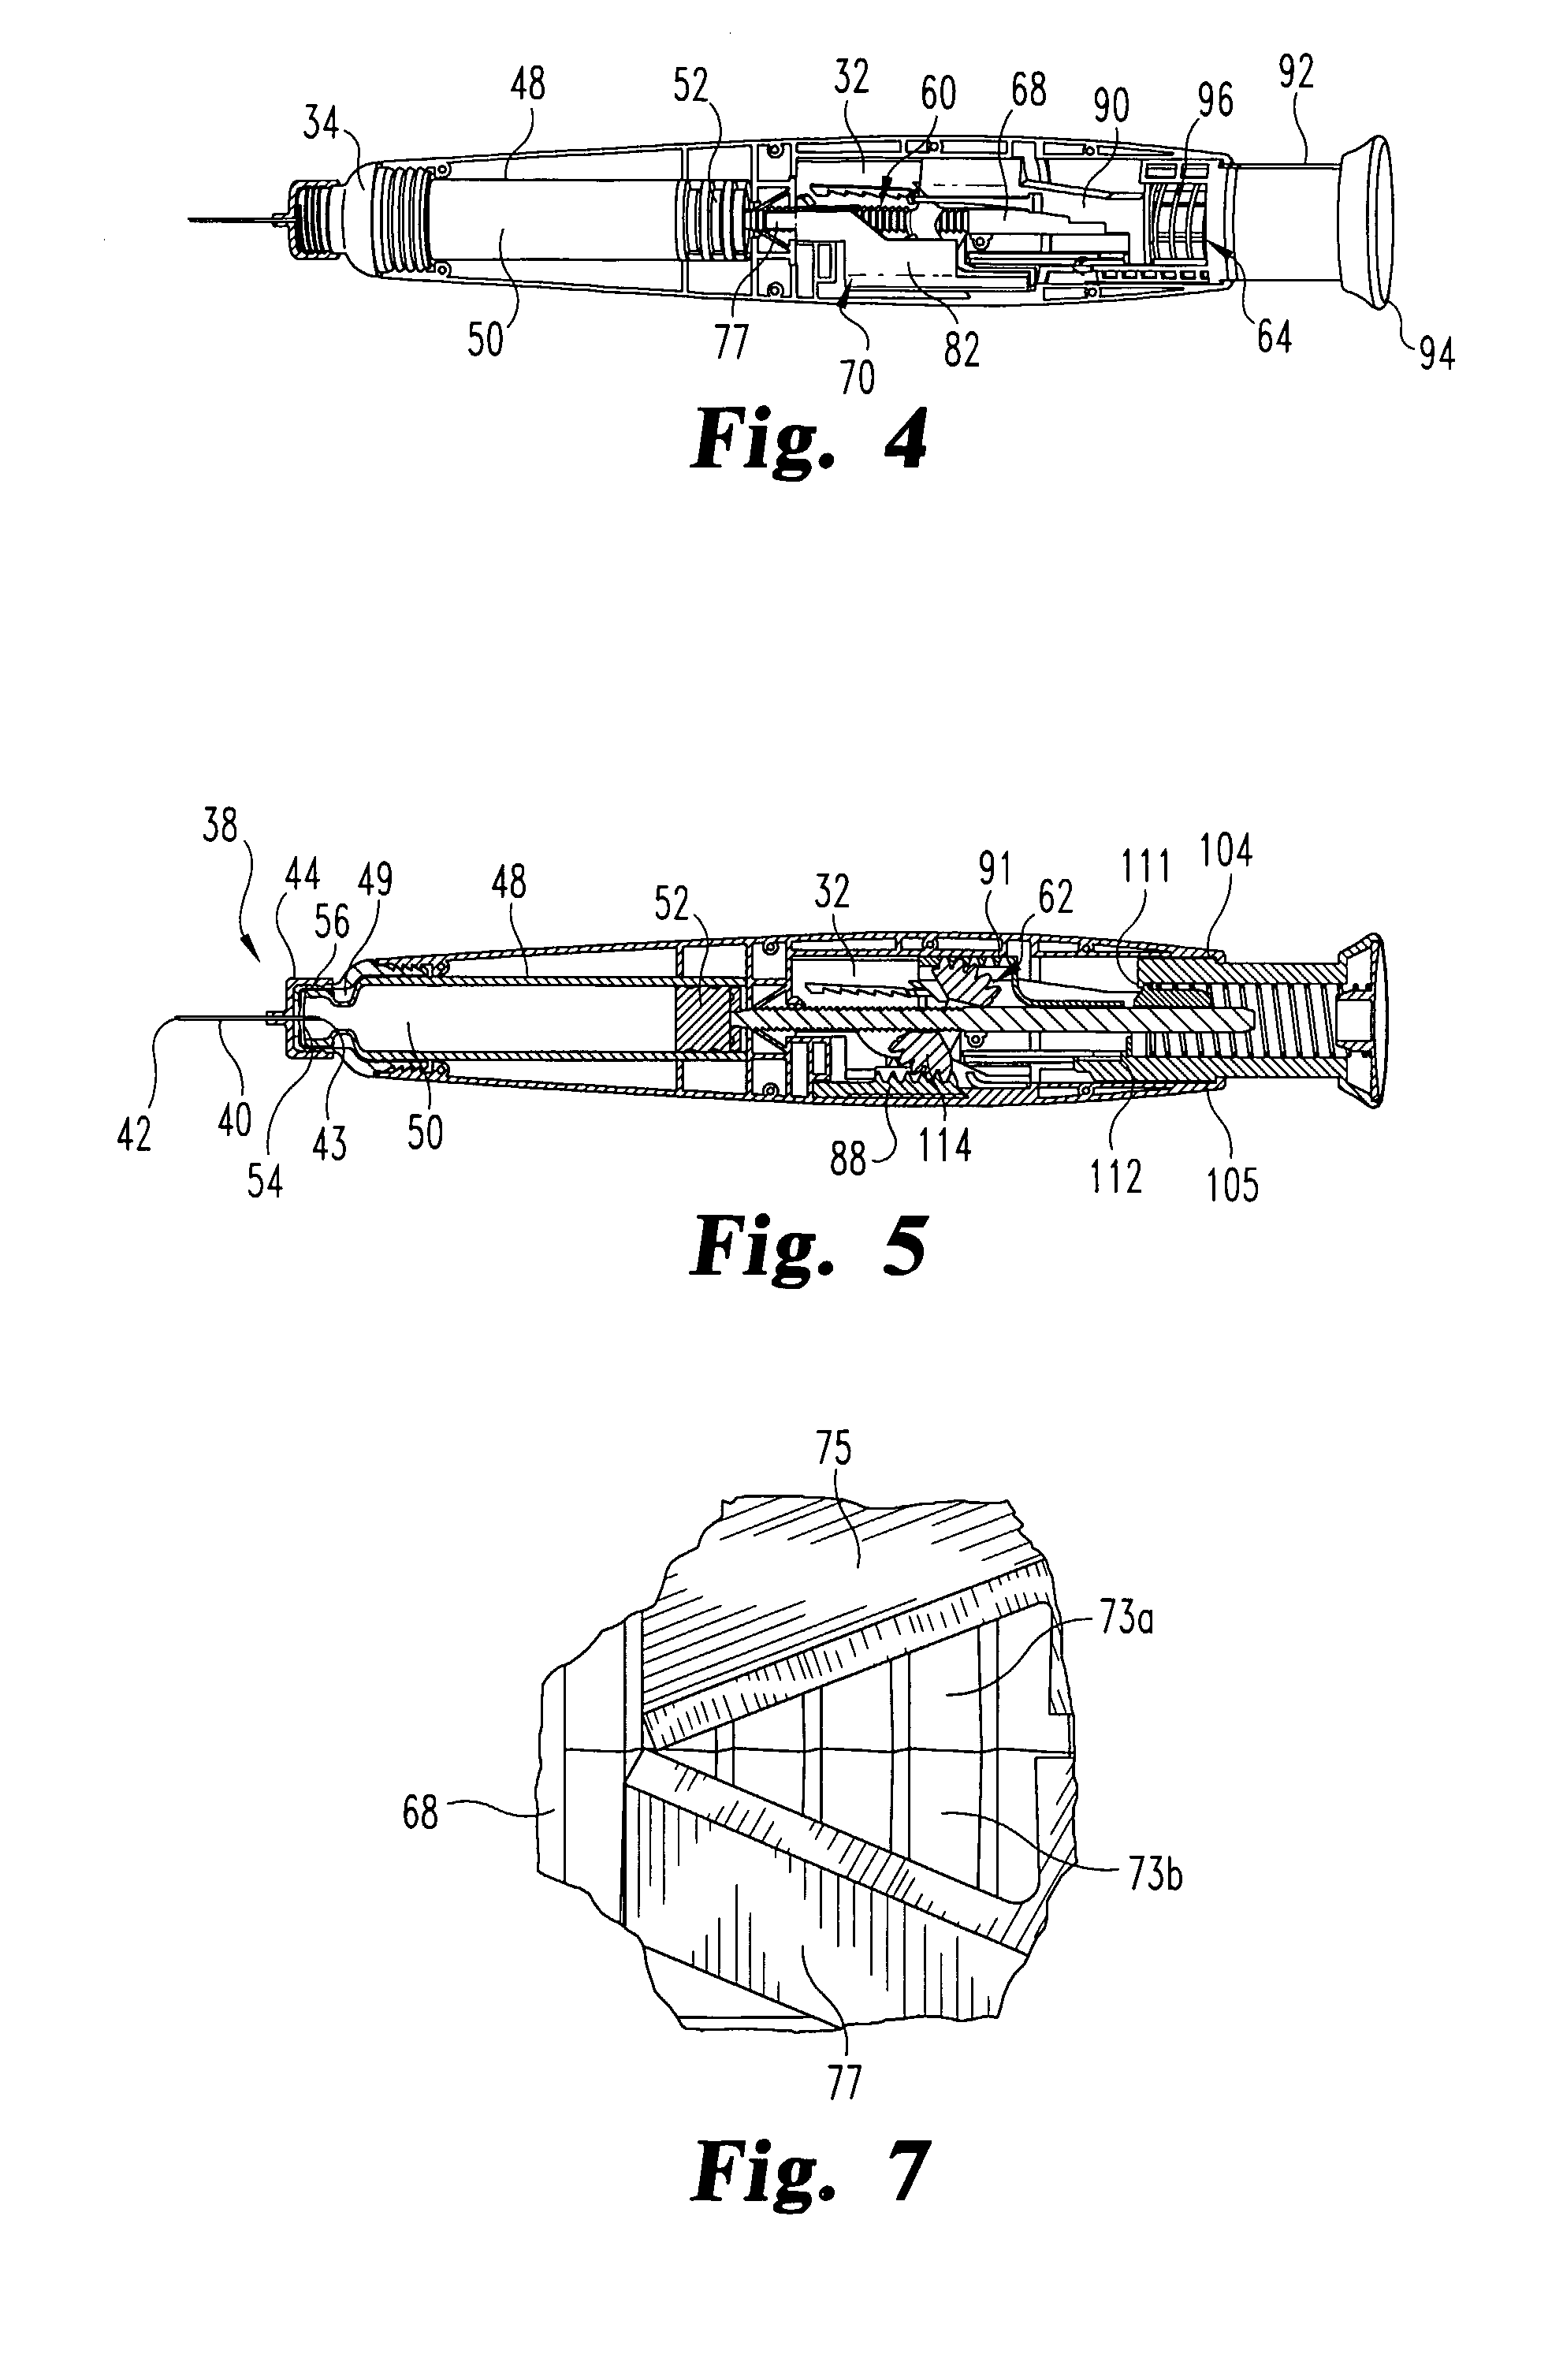 Medication dispensing apparatus with gear set having drive member accommodating opening